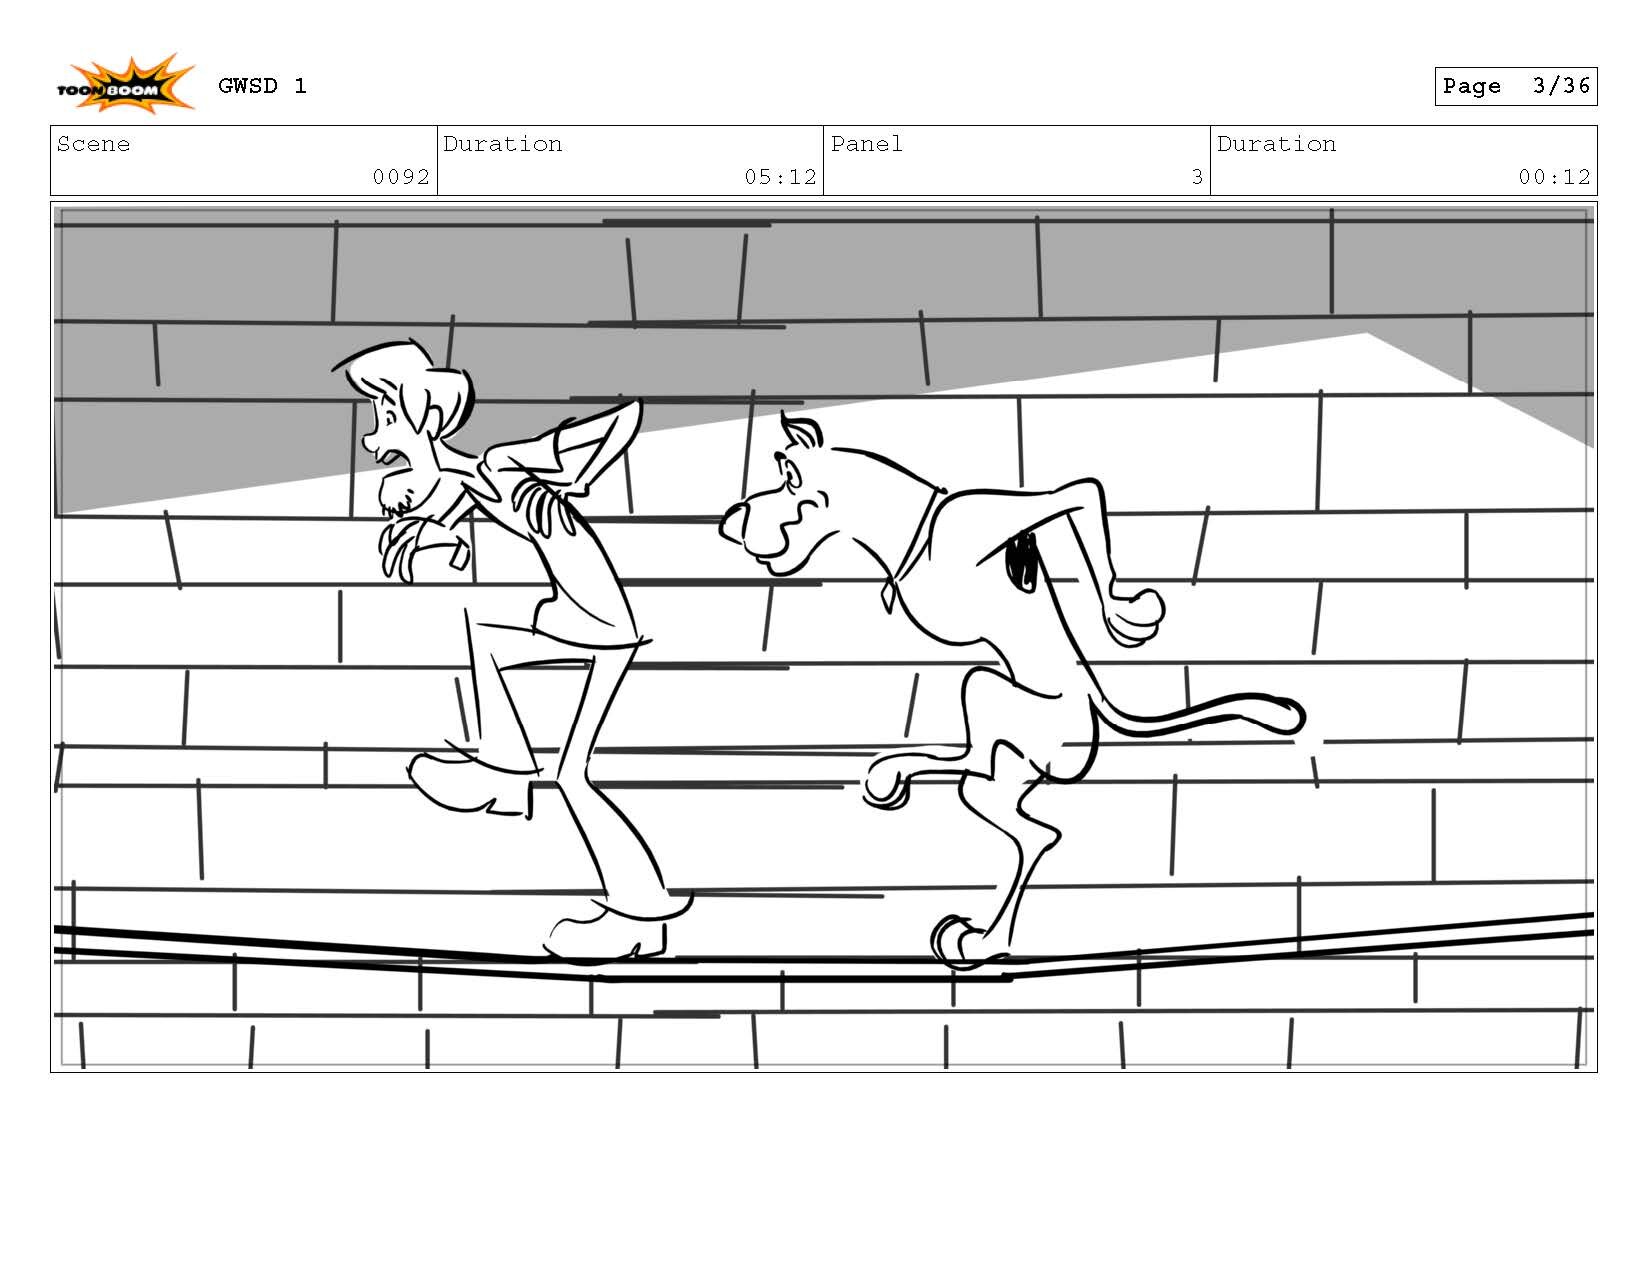 406_ScoobyDooGuessWho_Revisions_01_Page_03.jpg